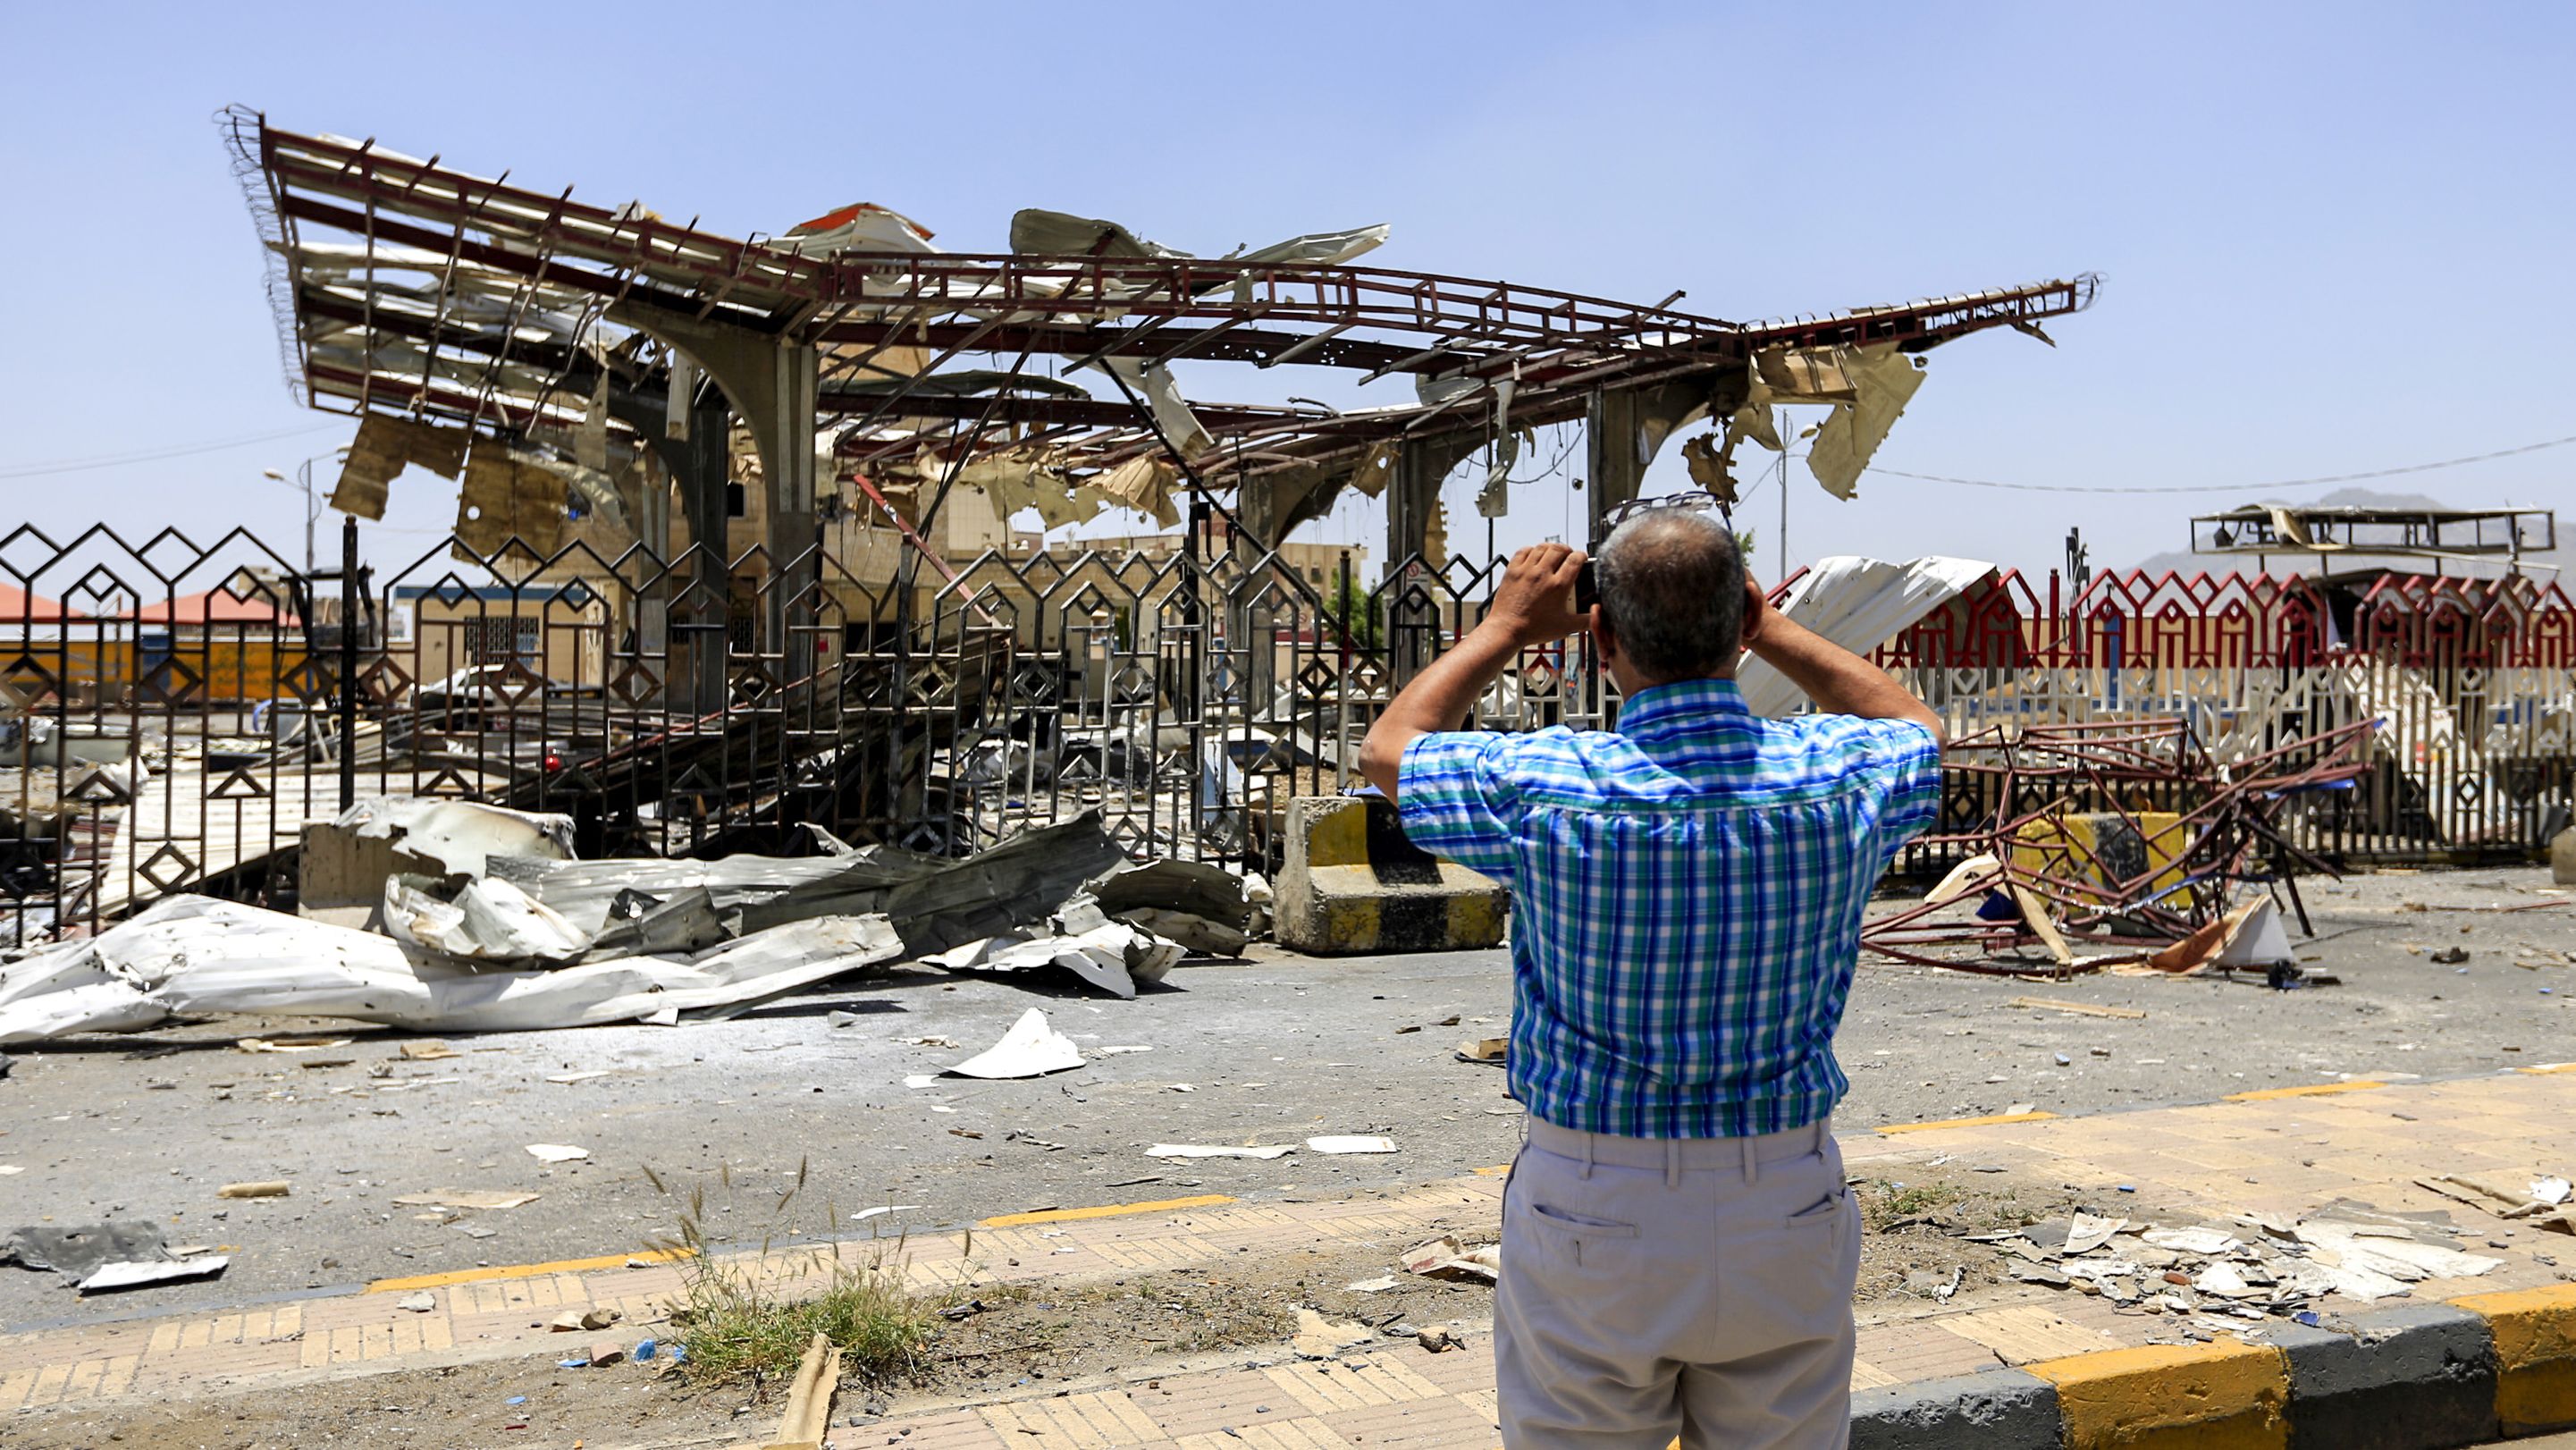 A Yemeni man uses a cell phone to take a picture of a destroyed petrol station that was hit by an airstrike in the capital Sanaa on May 27, 2018.